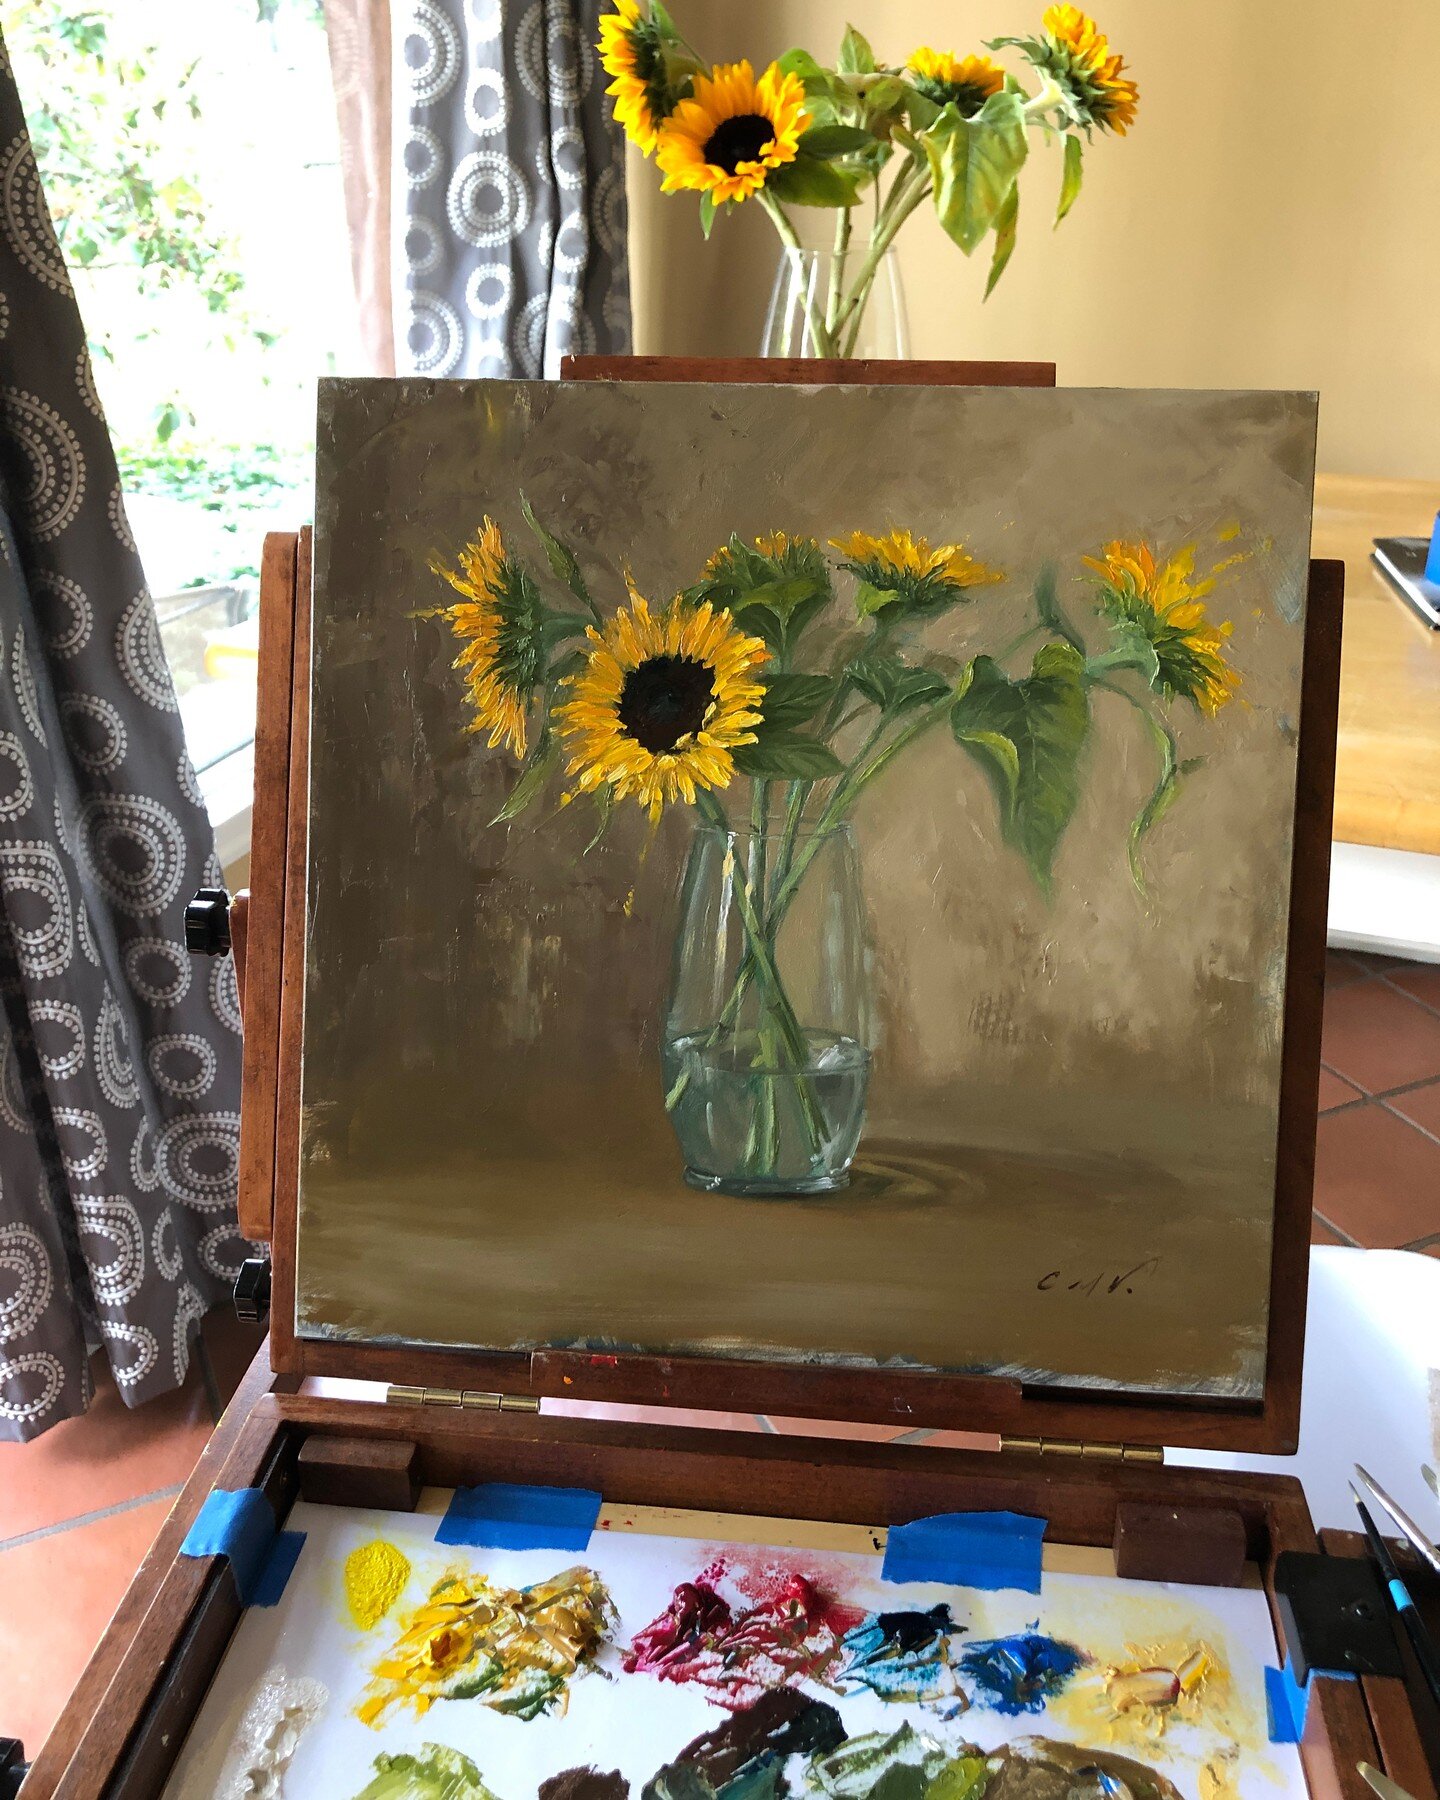 My goodness. I&rsquo;ve got some Studio sale info you&rsquo;ve been waiting for, but first&hellip; been crazy around here! I&rsquo;m gearing up to get back to the easel after a little break to enjoy my daughters&rsquo; last high school soccer season.